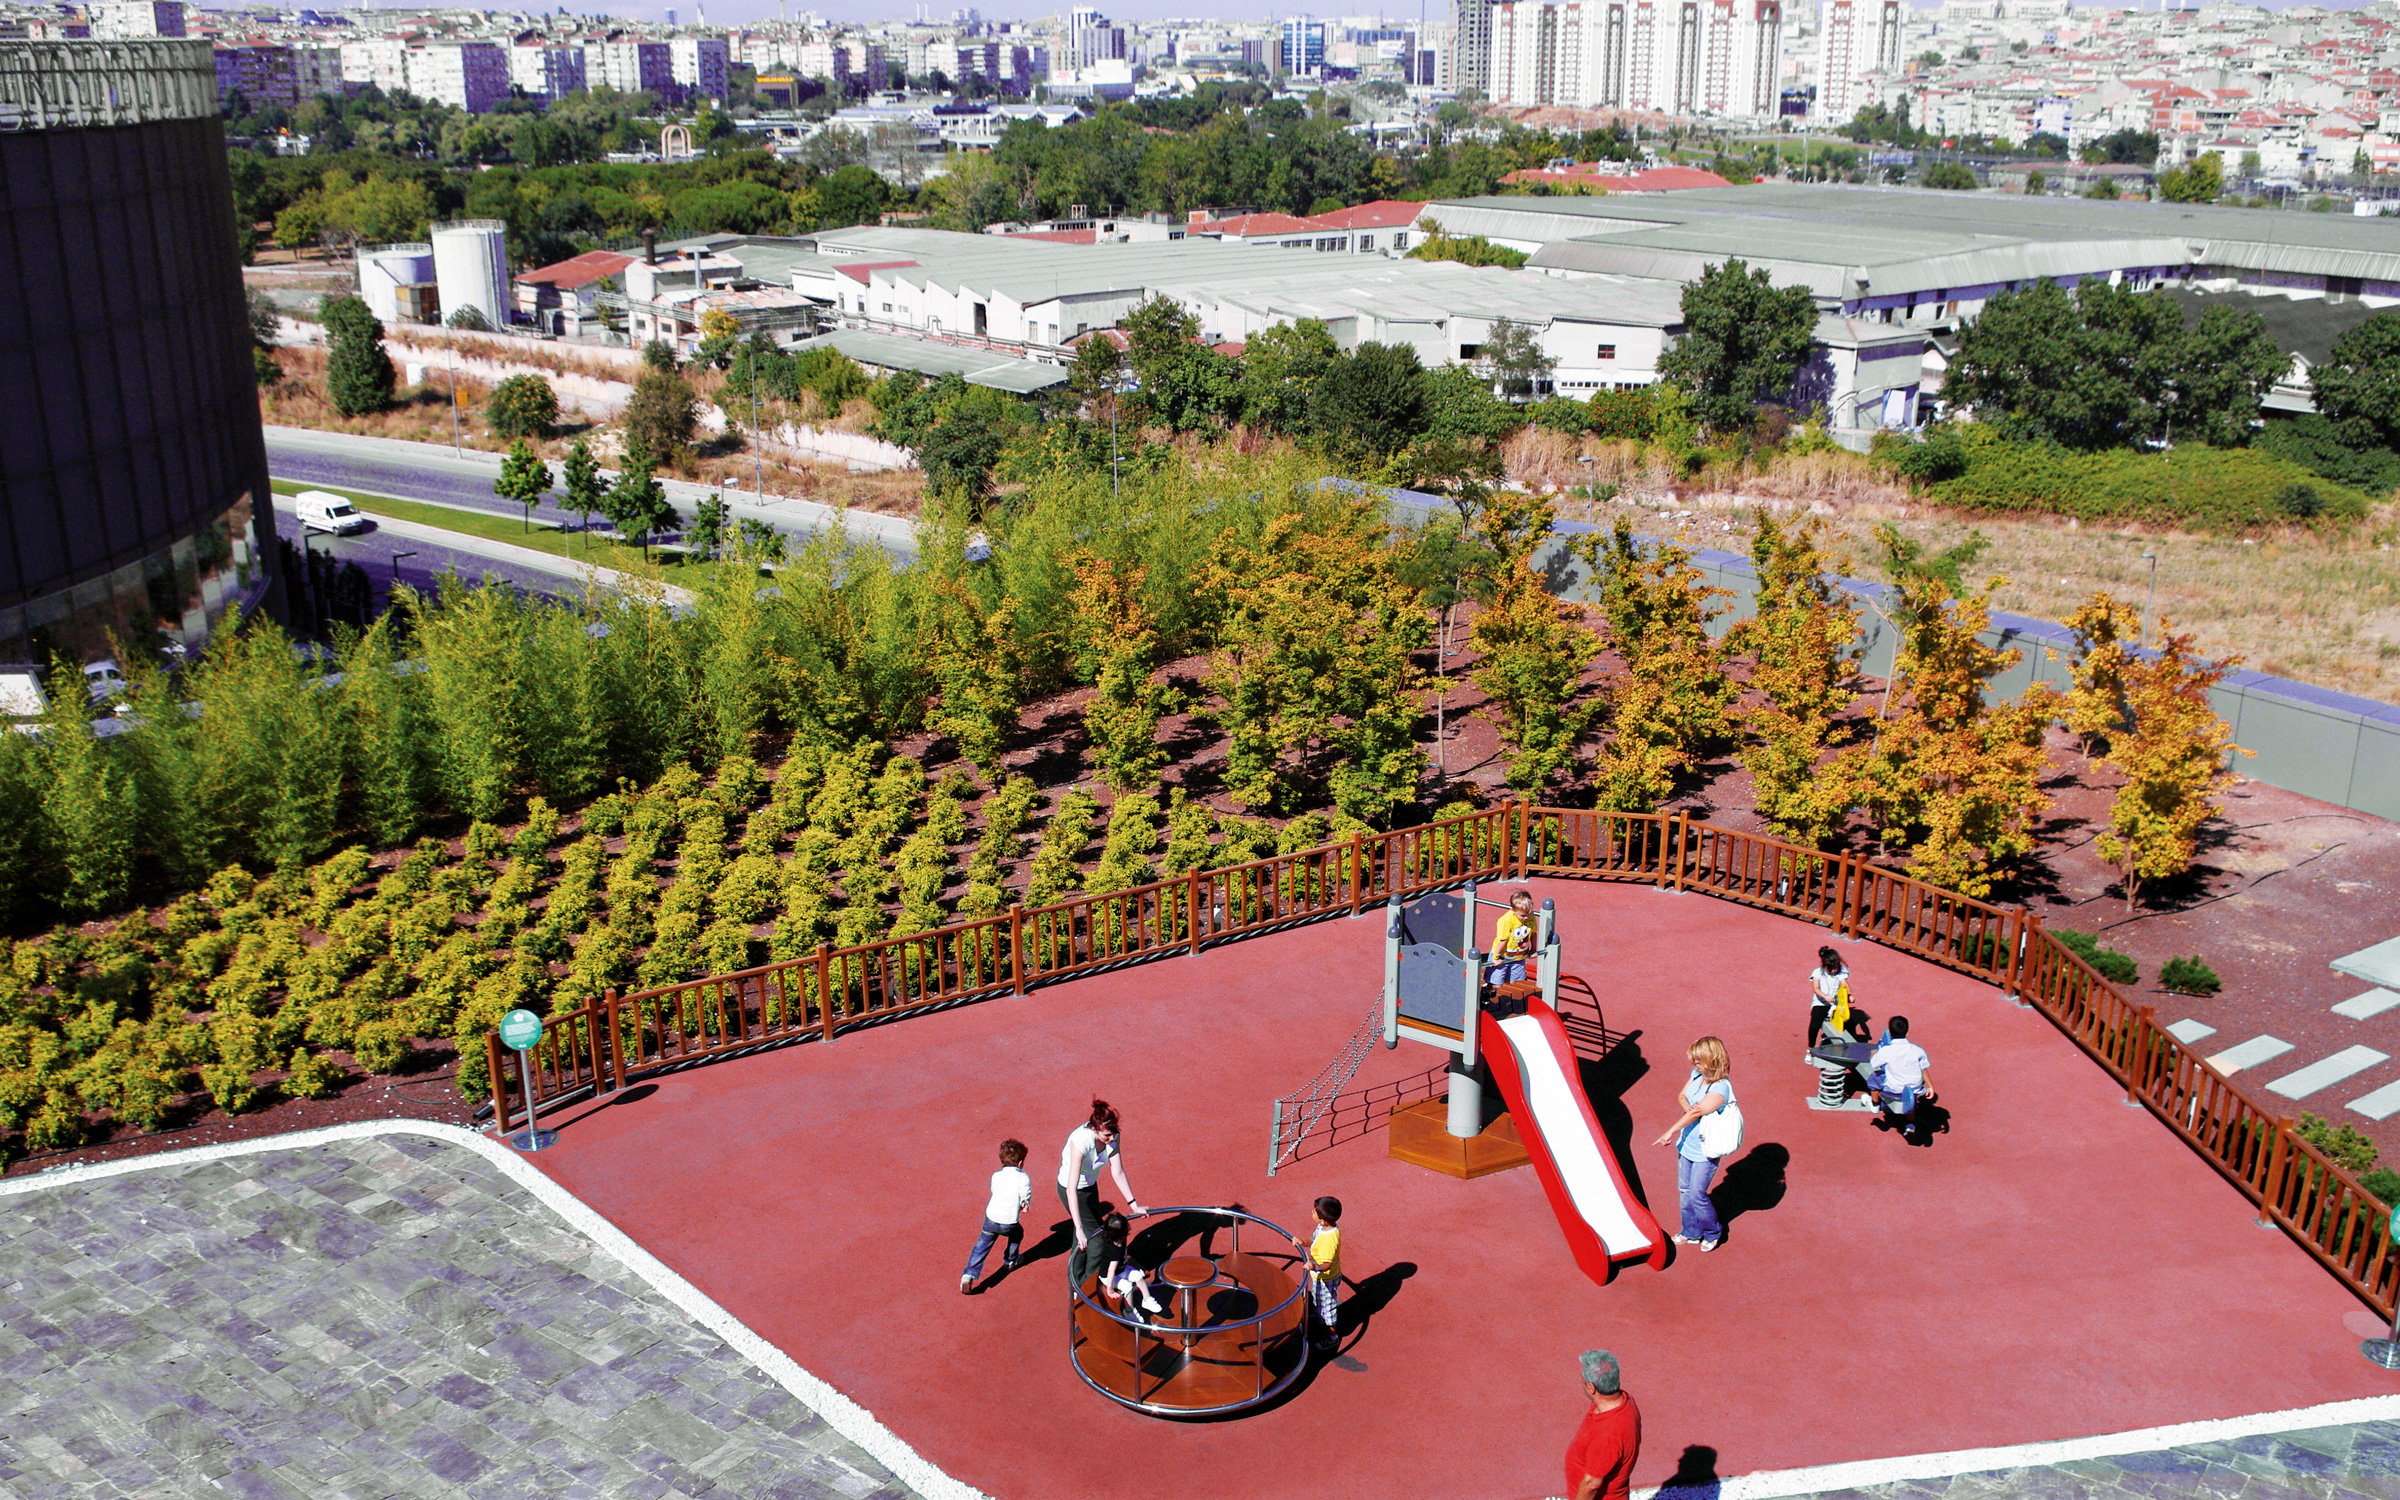 Playground for children on a roof